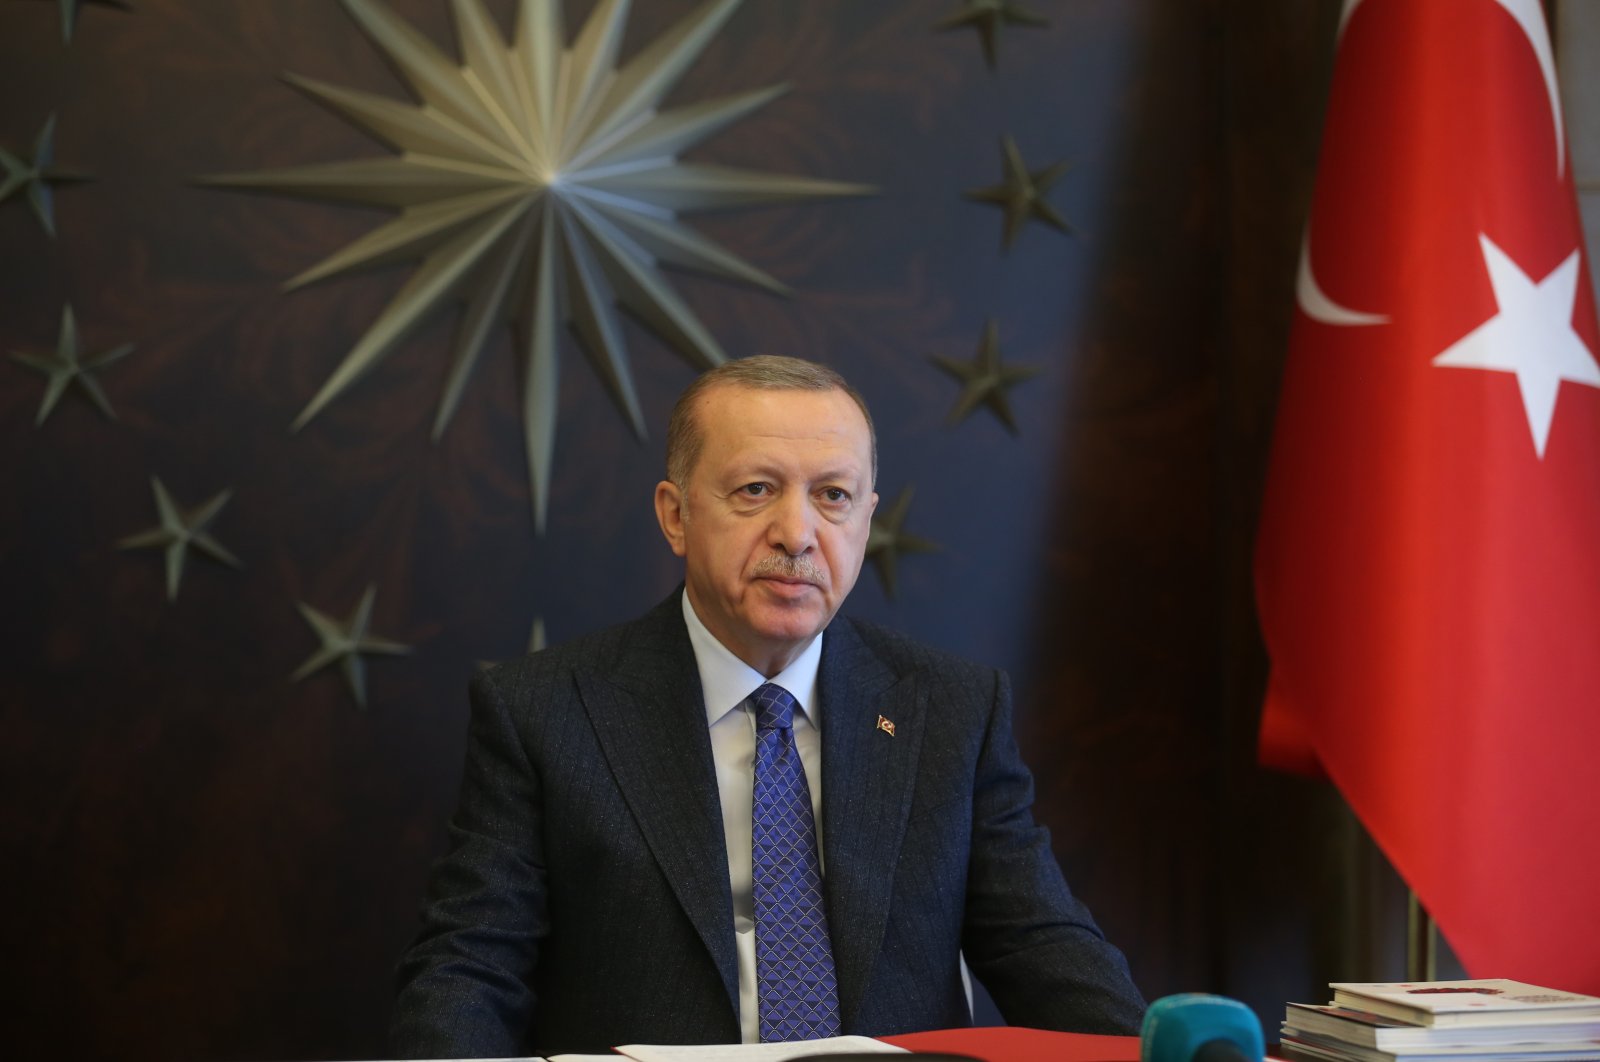 President Recep Tayyip Erdoğan during a videoconference in the Presidential Complex, Ankara, May 22, 2020. (DHA Photo)